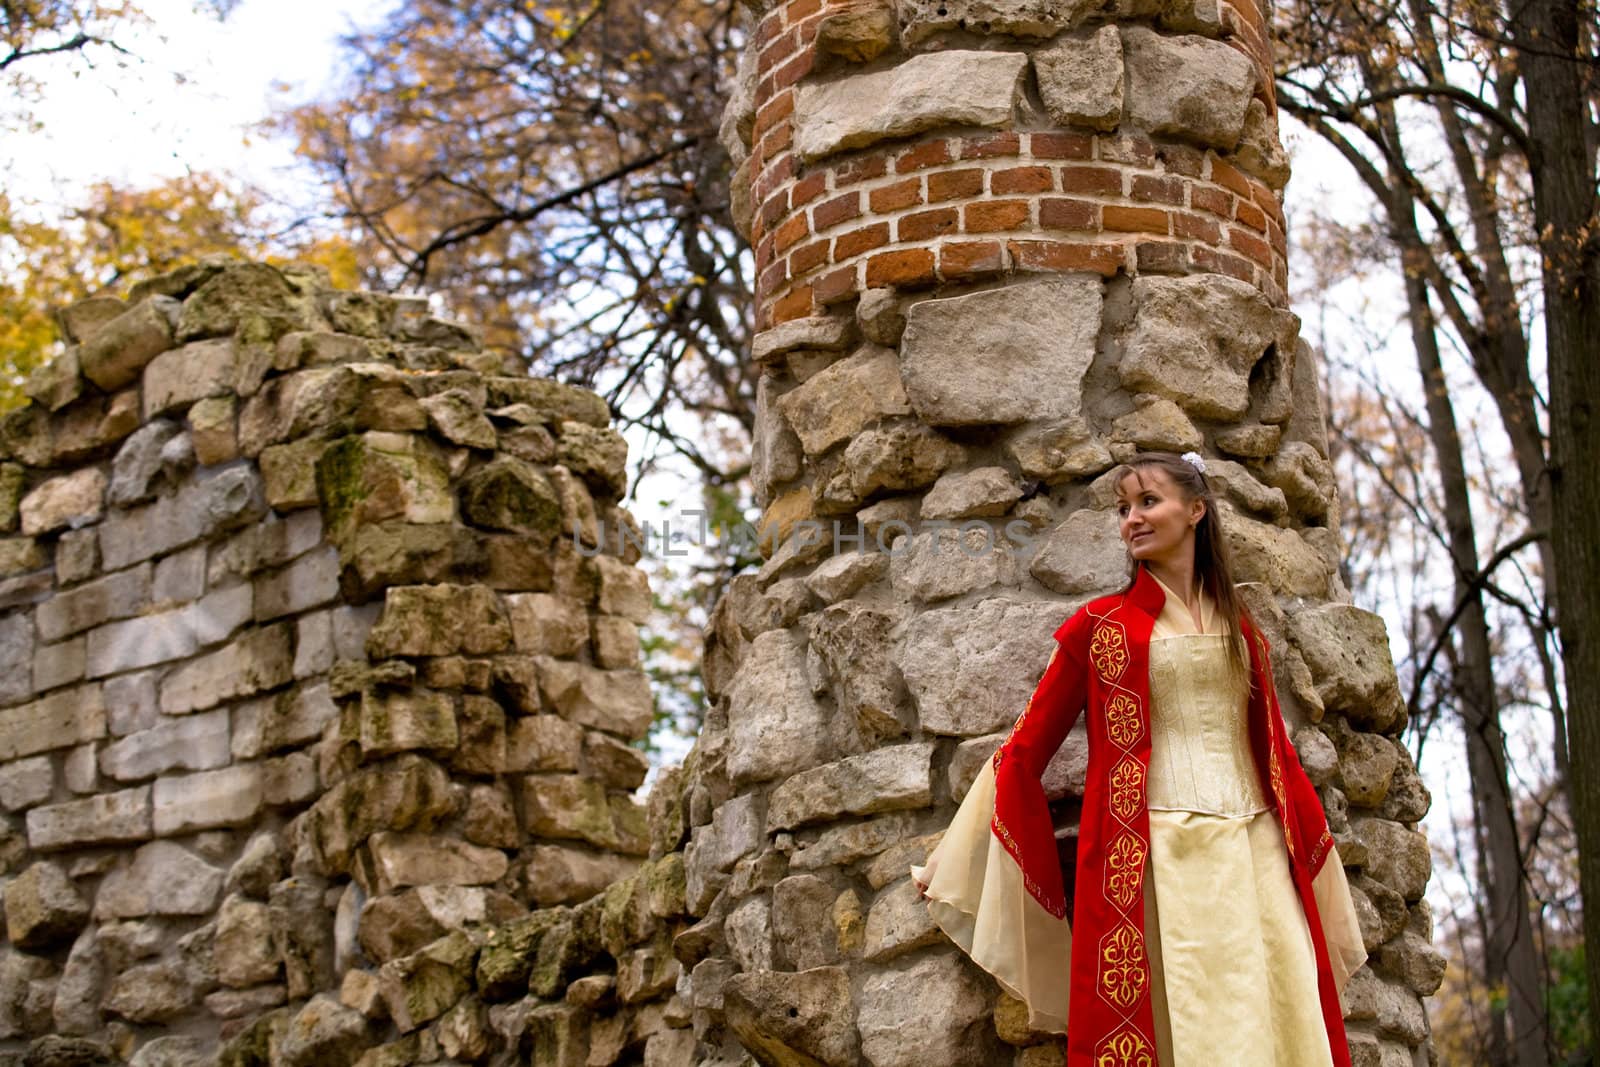 lady in medieval red dress standing near old wall
